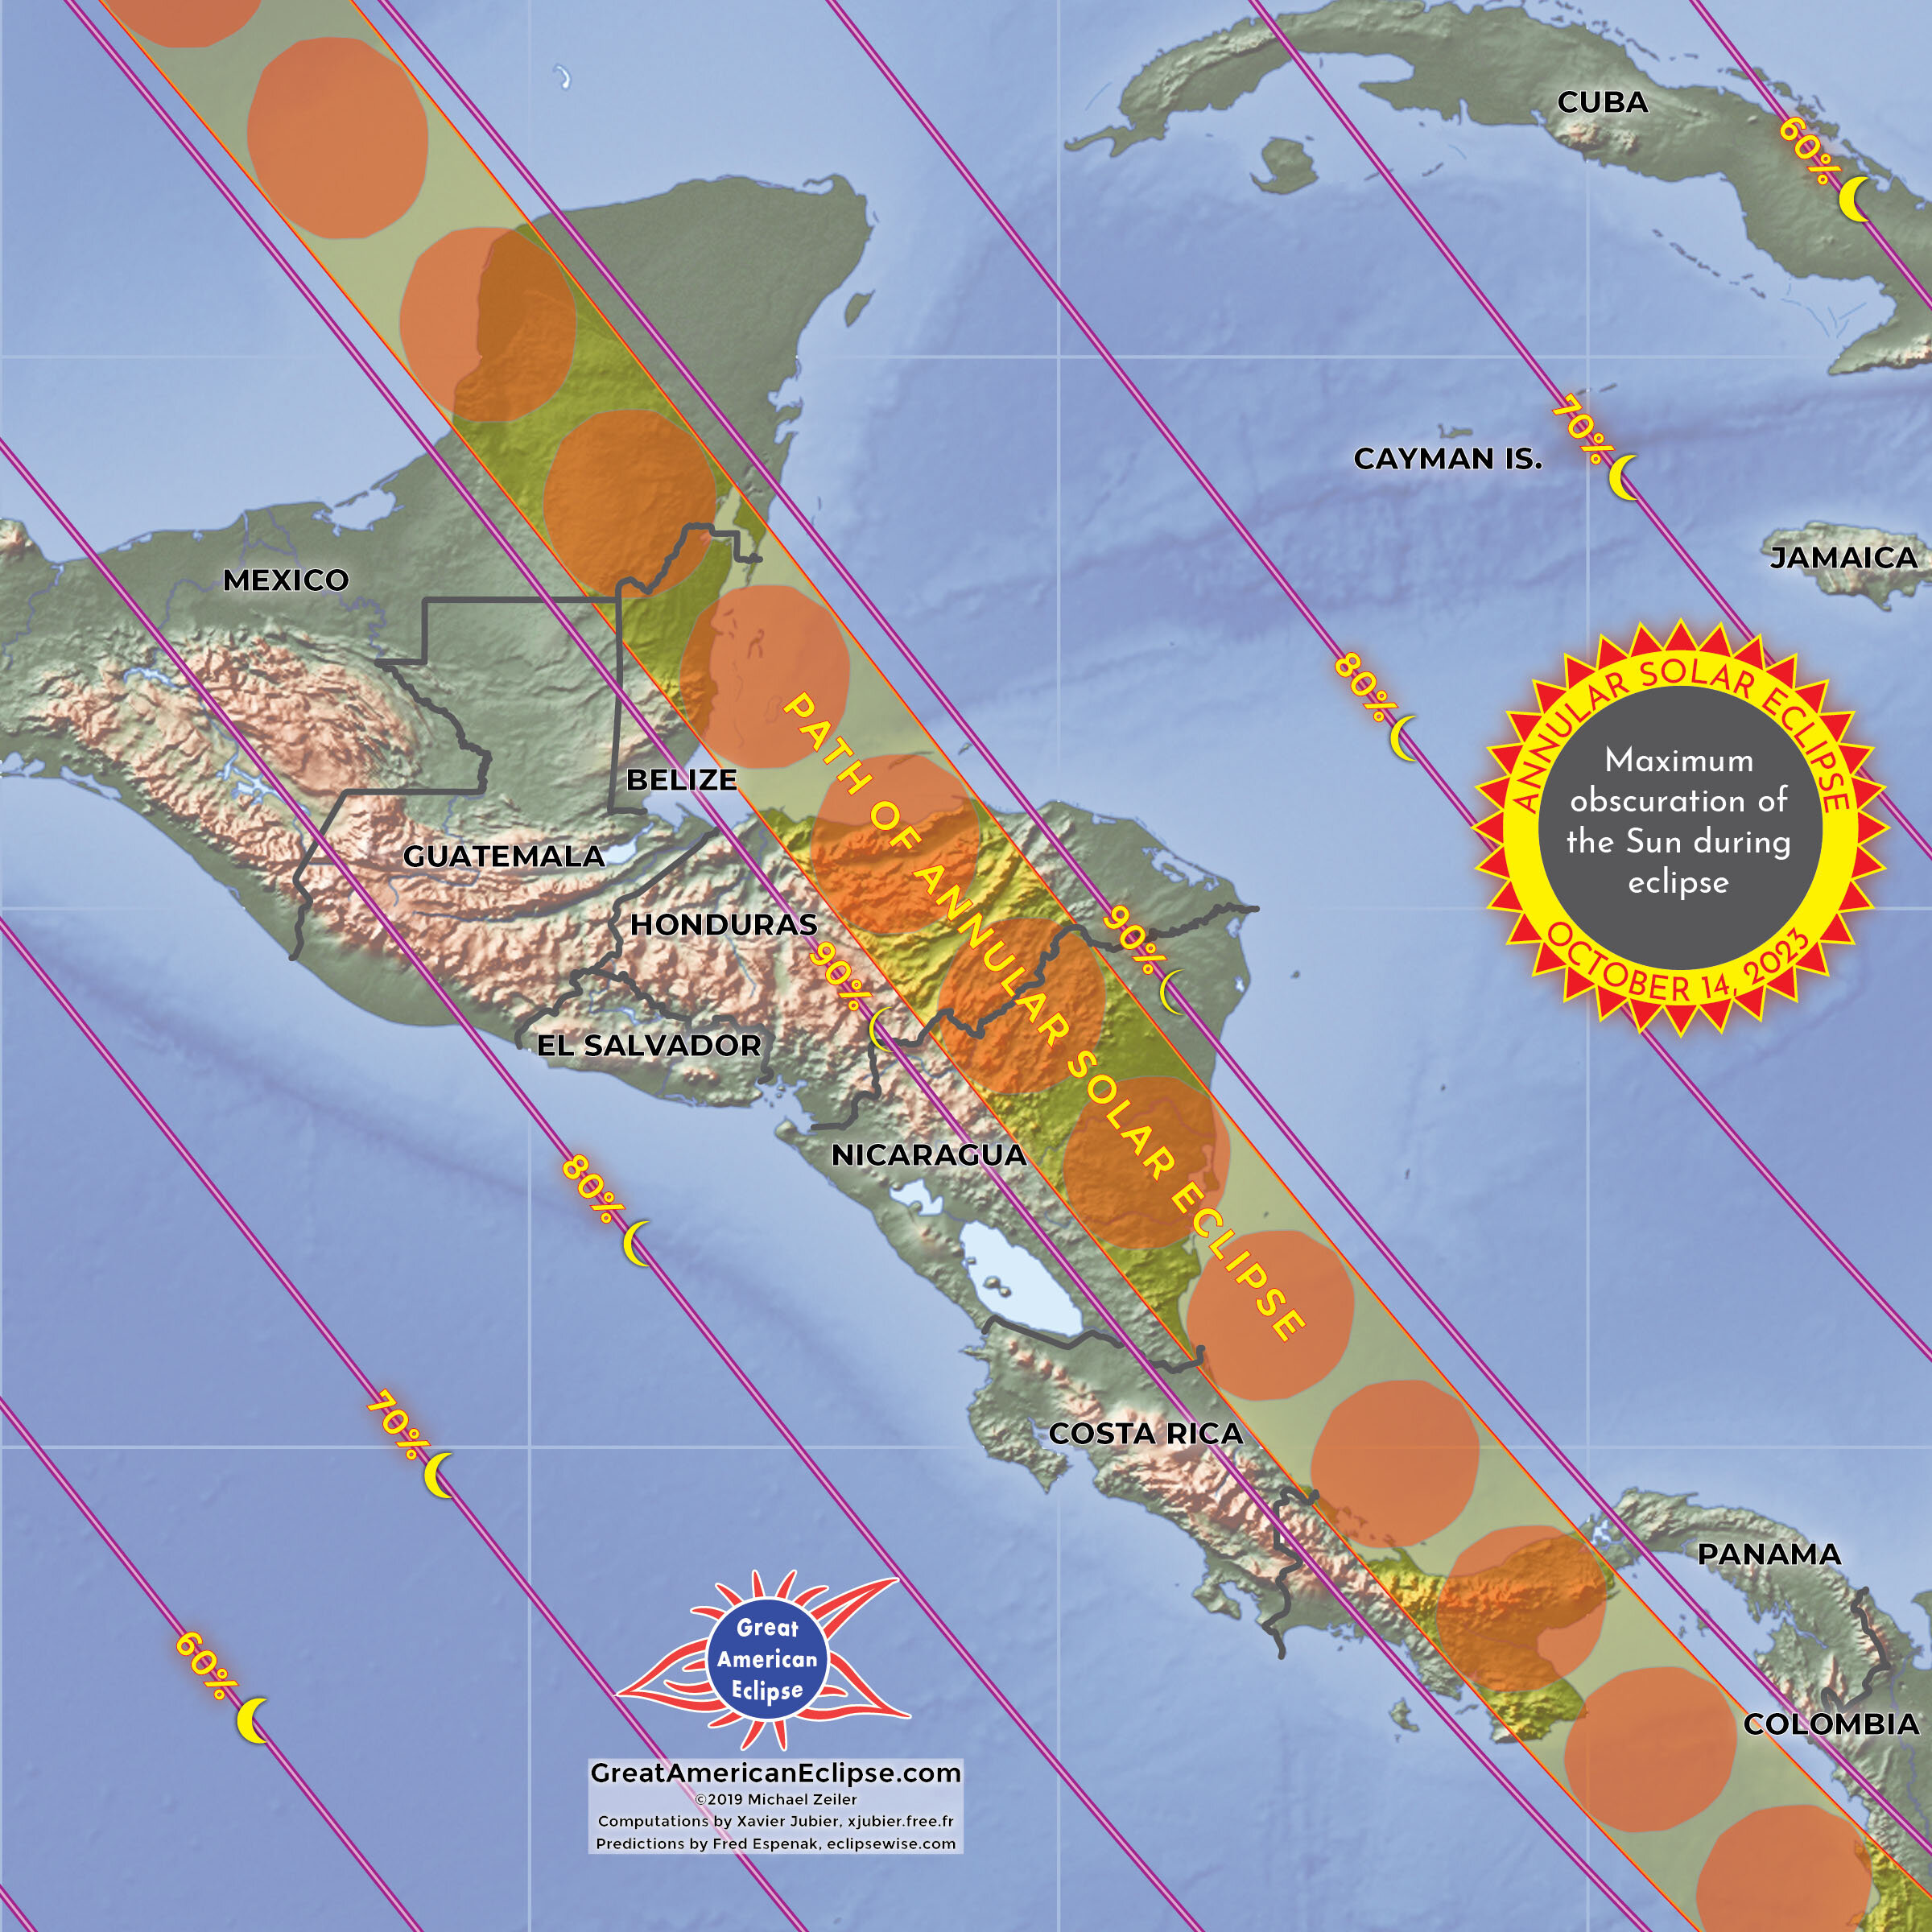 Illustration of the annular solar eclipse path across Central America.